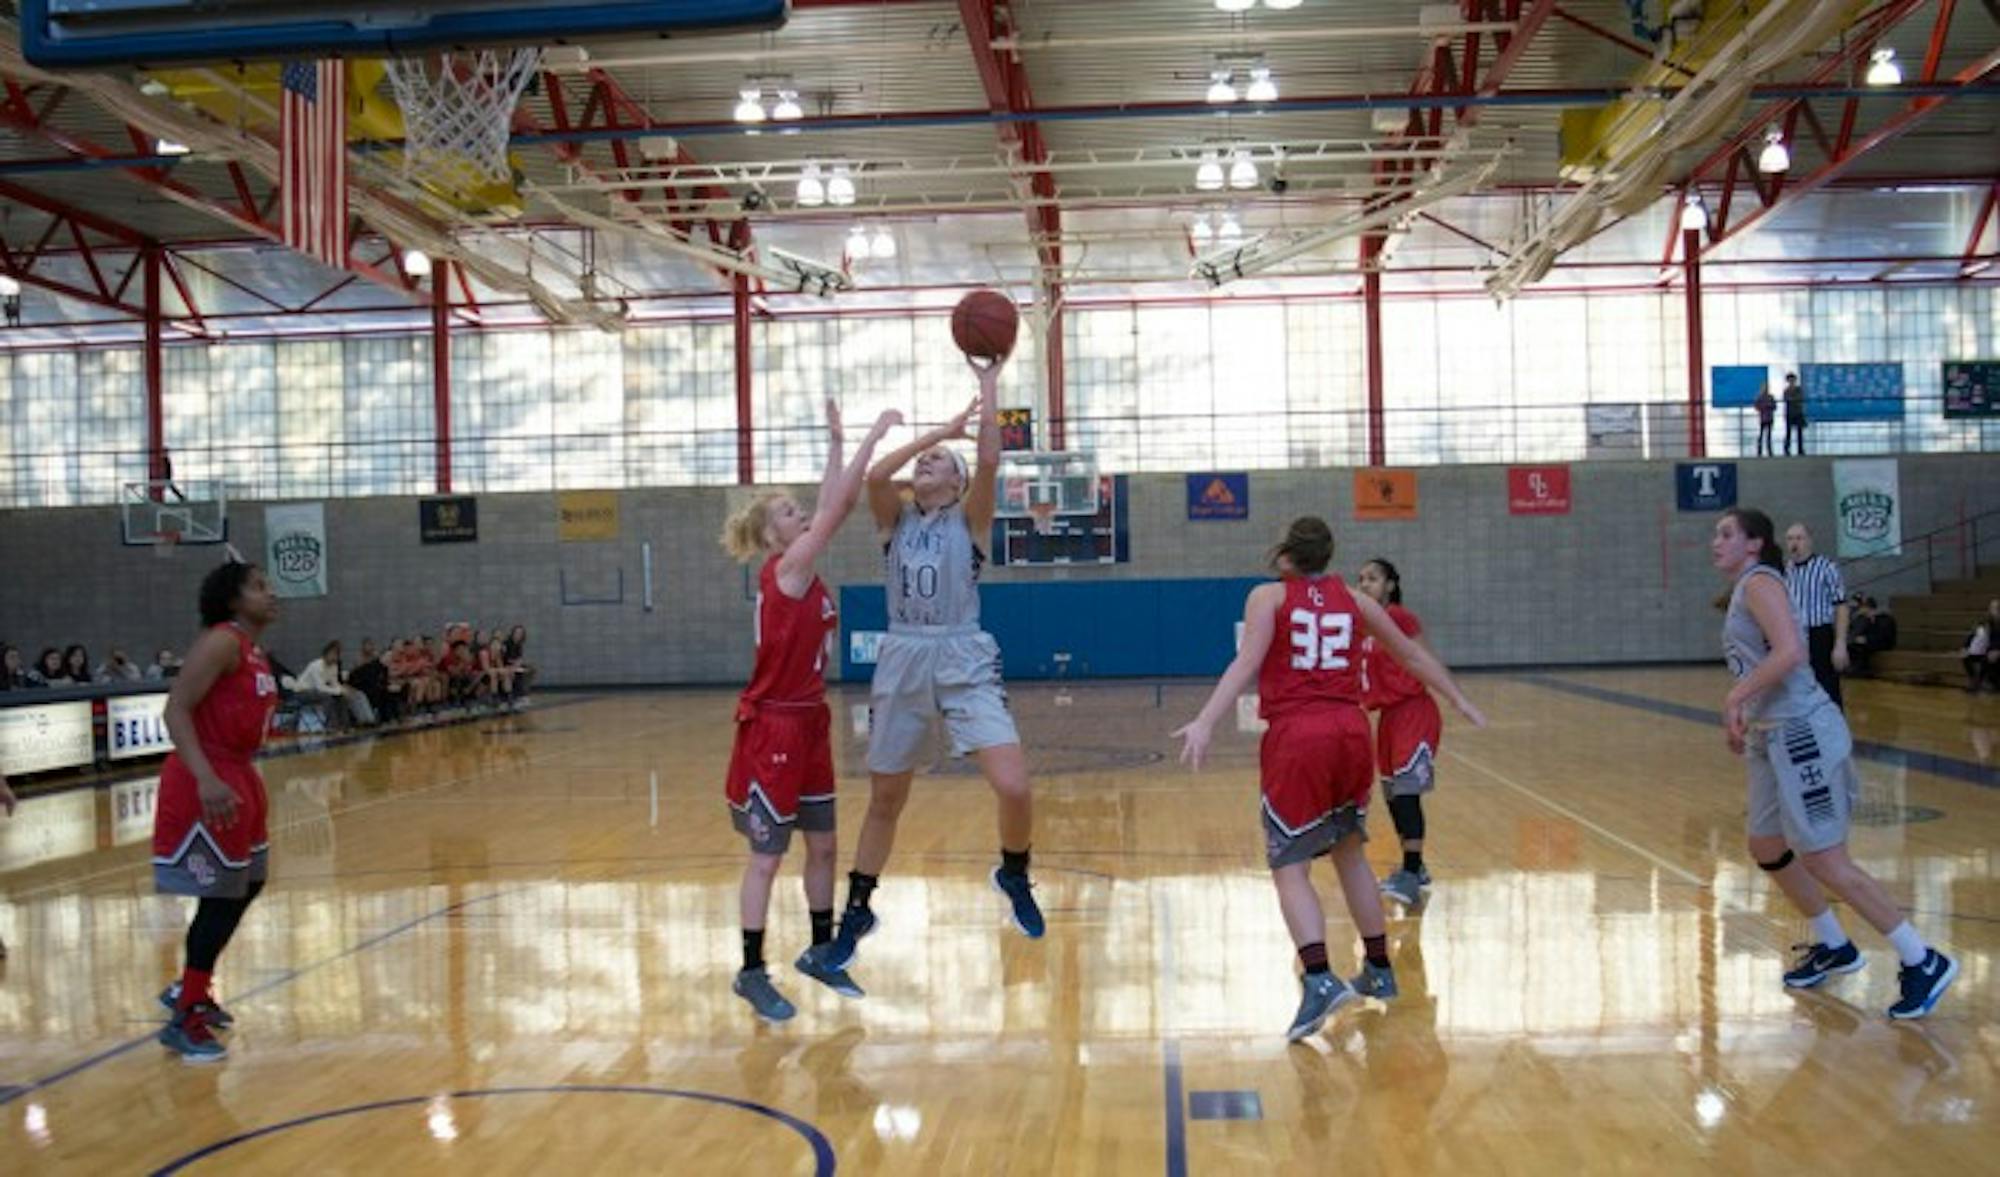 Belles senior forward Eleni Shea takes a shot during Saint Mary’s 52-49 loss to Olivet on Saturday at Angela Athletic Facility.  Shea, one of the team’s captains this season, scored eight points, grabbed seven rebounds and dished out two assists during the game.